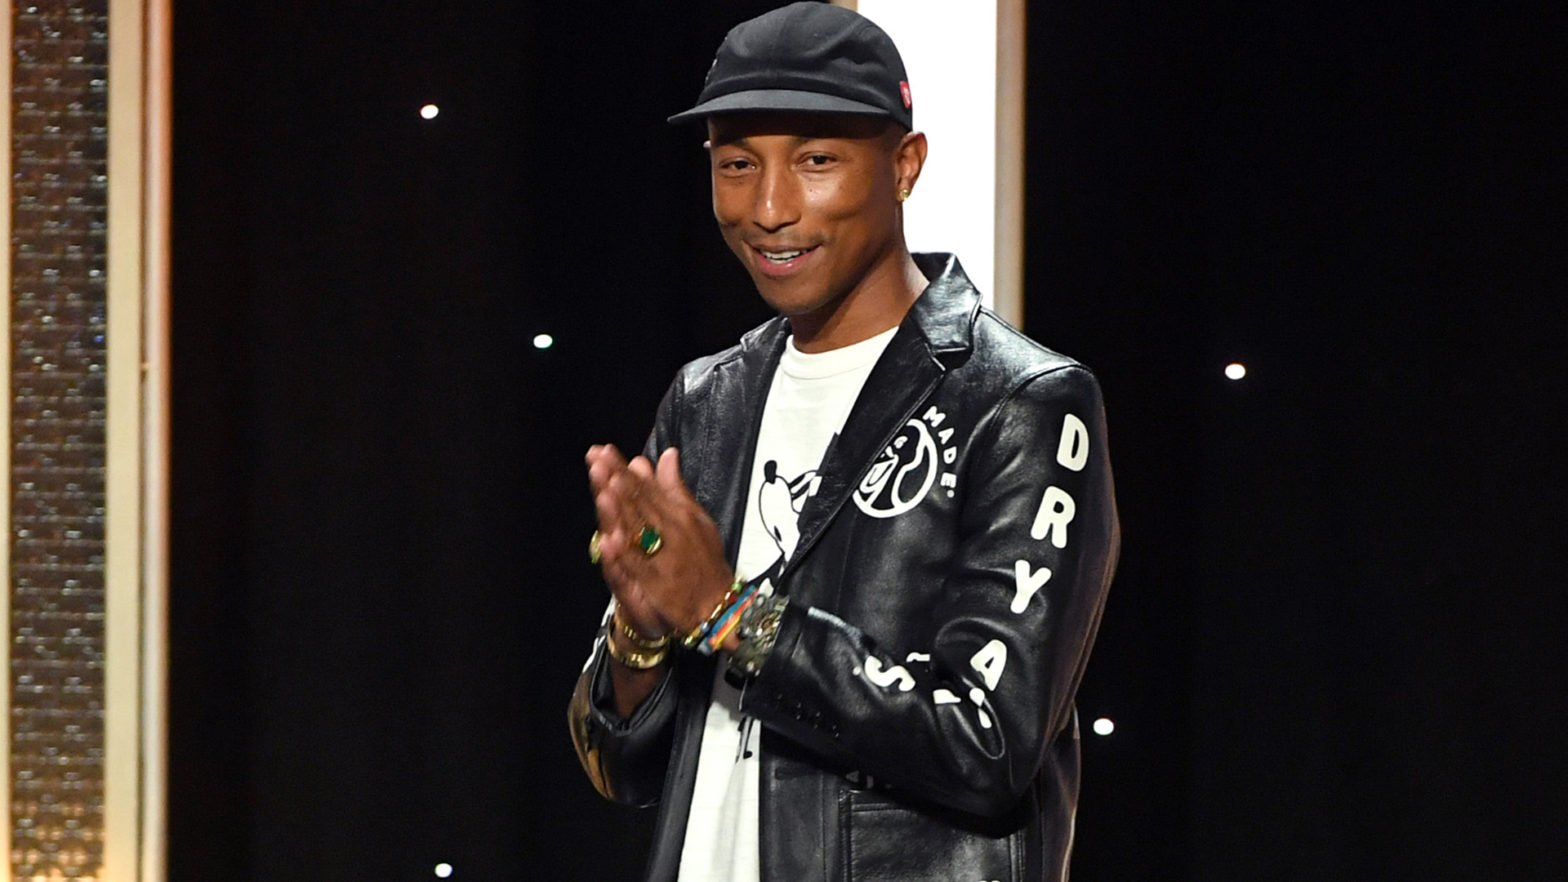 Pharrell Williams’ Billionaire Boys Club Joins Forces With Cam Kirk Studios To Open A Creator’s Lab In Atlanta, GA